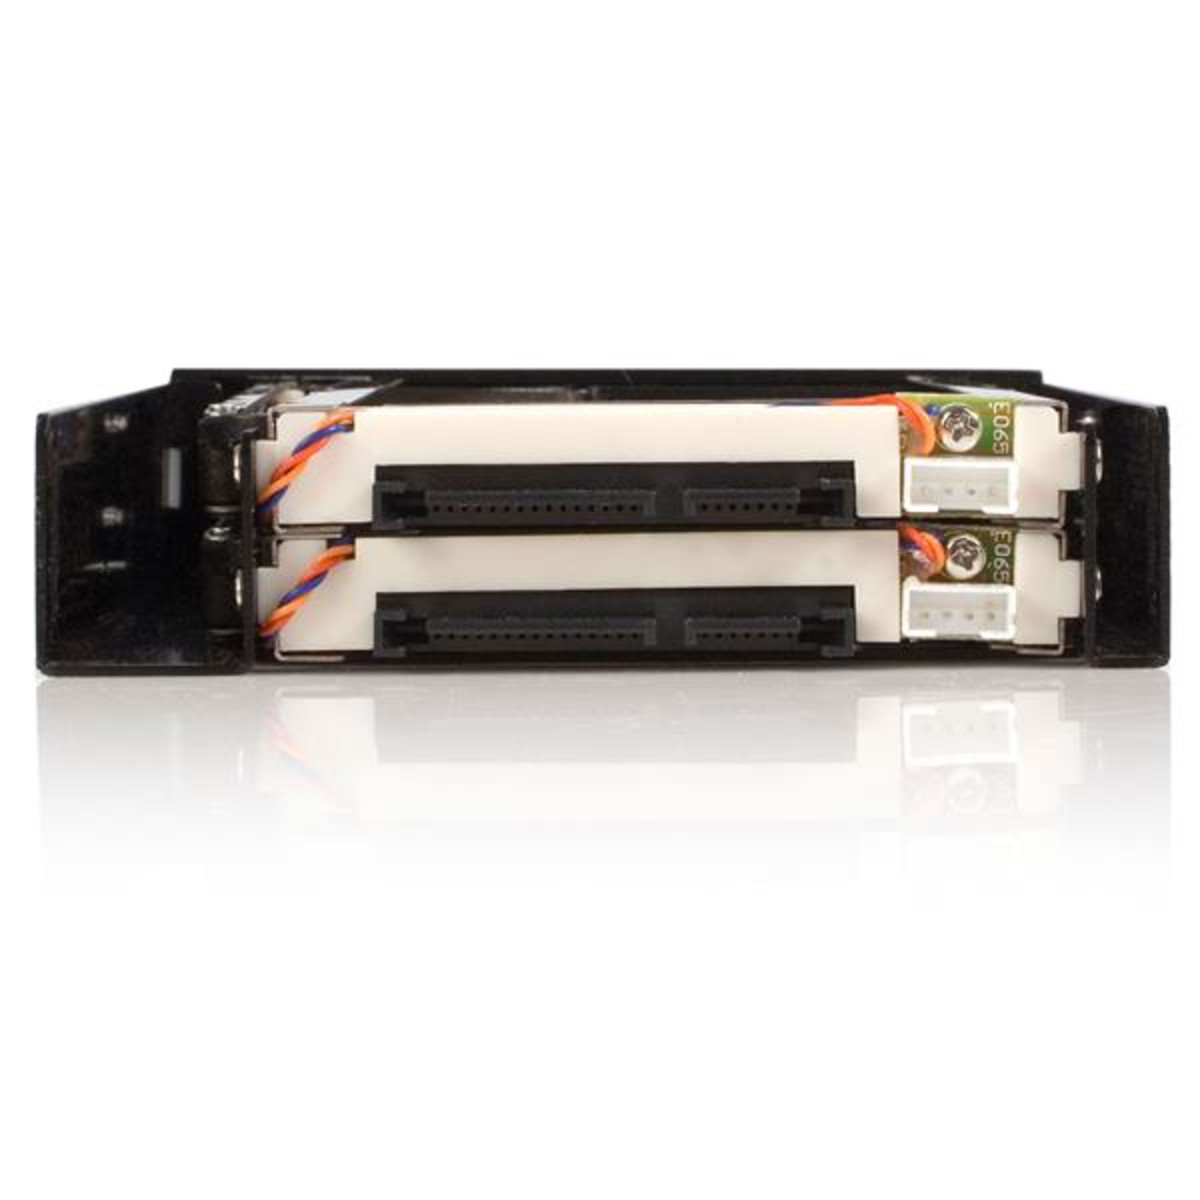 2 Drive 2.5in Trayless SATA Mobile Rack